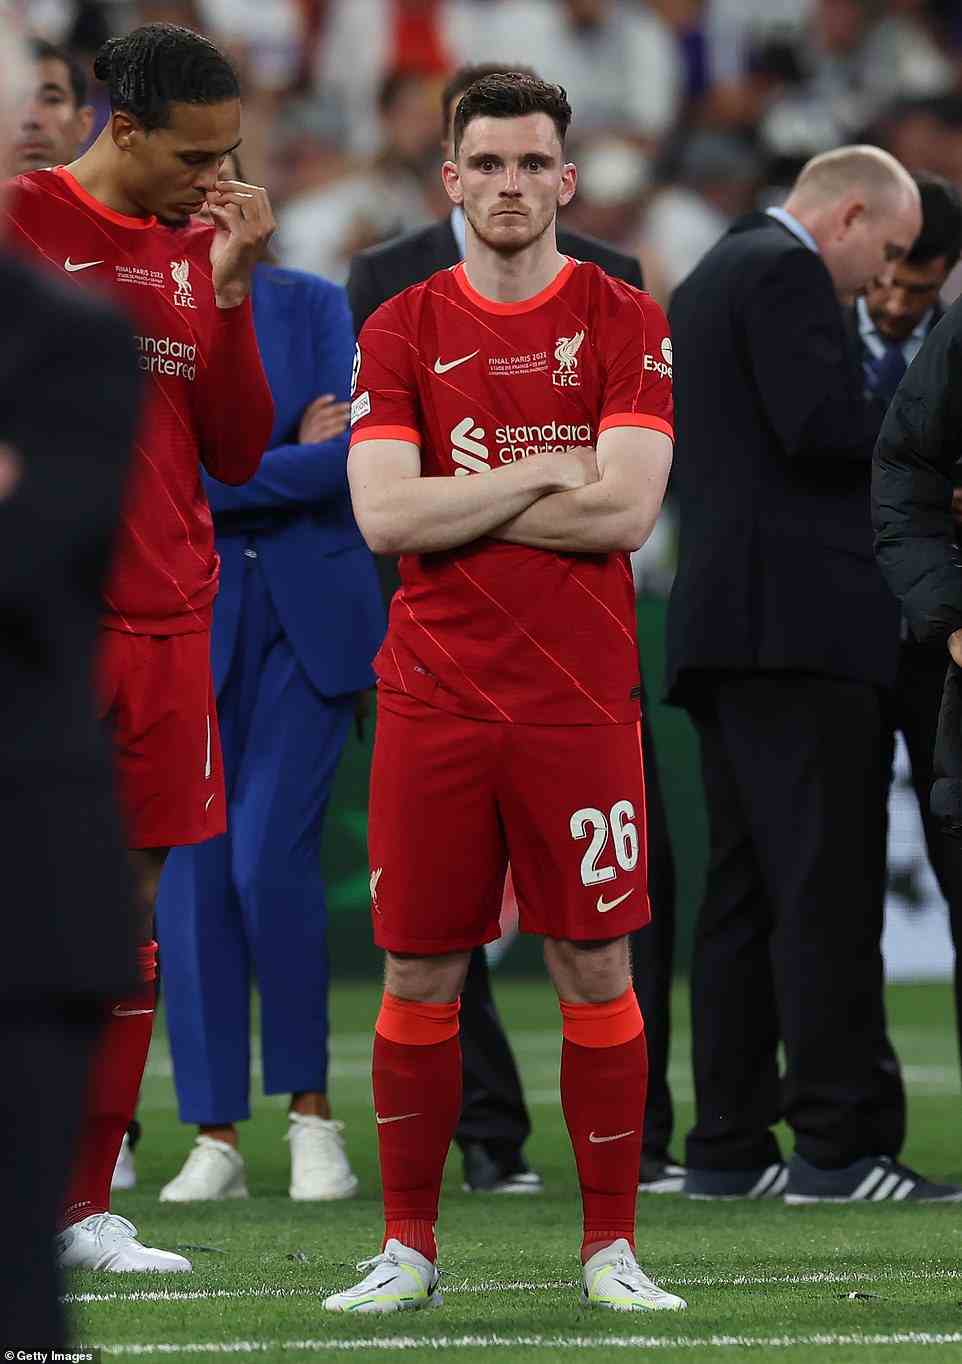 Liverpool defender Andy Robertson told the BBC following the game one of this friends was refused entry and accused of having a fake ticket